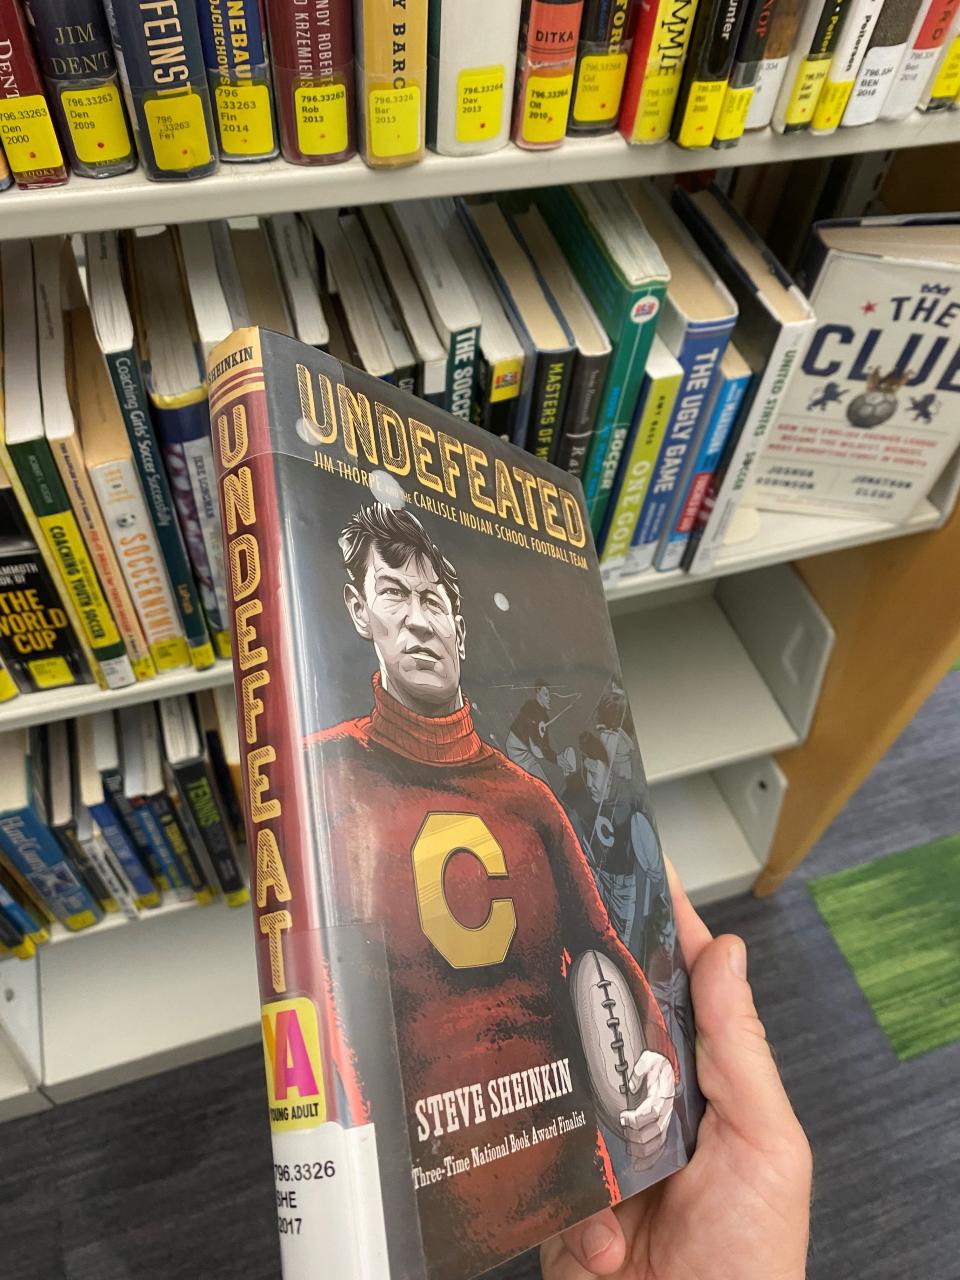 The Hamilton East Public Library Board moved several Young Adult books to the sports section, making them more difficult to find.